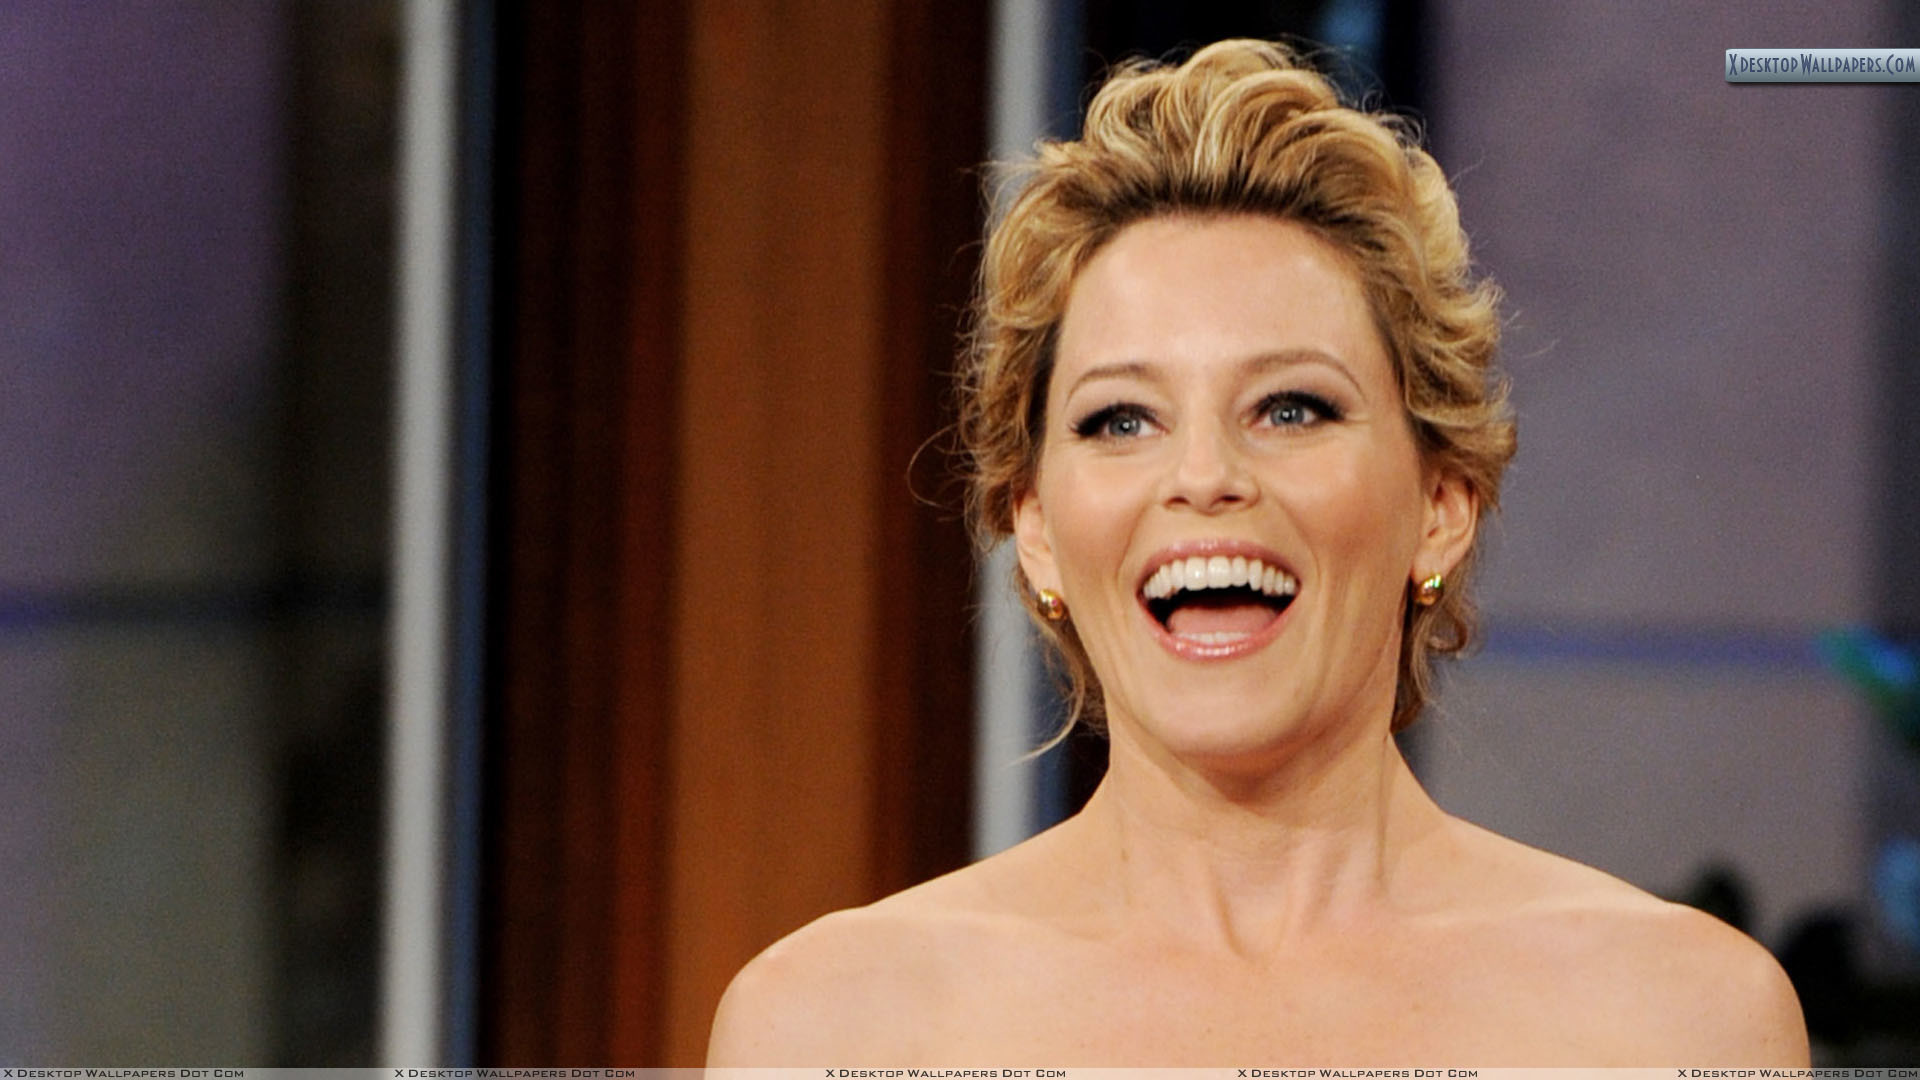 1920x1080 You are viewing wallpaper titled "Elizabeth Banks ...